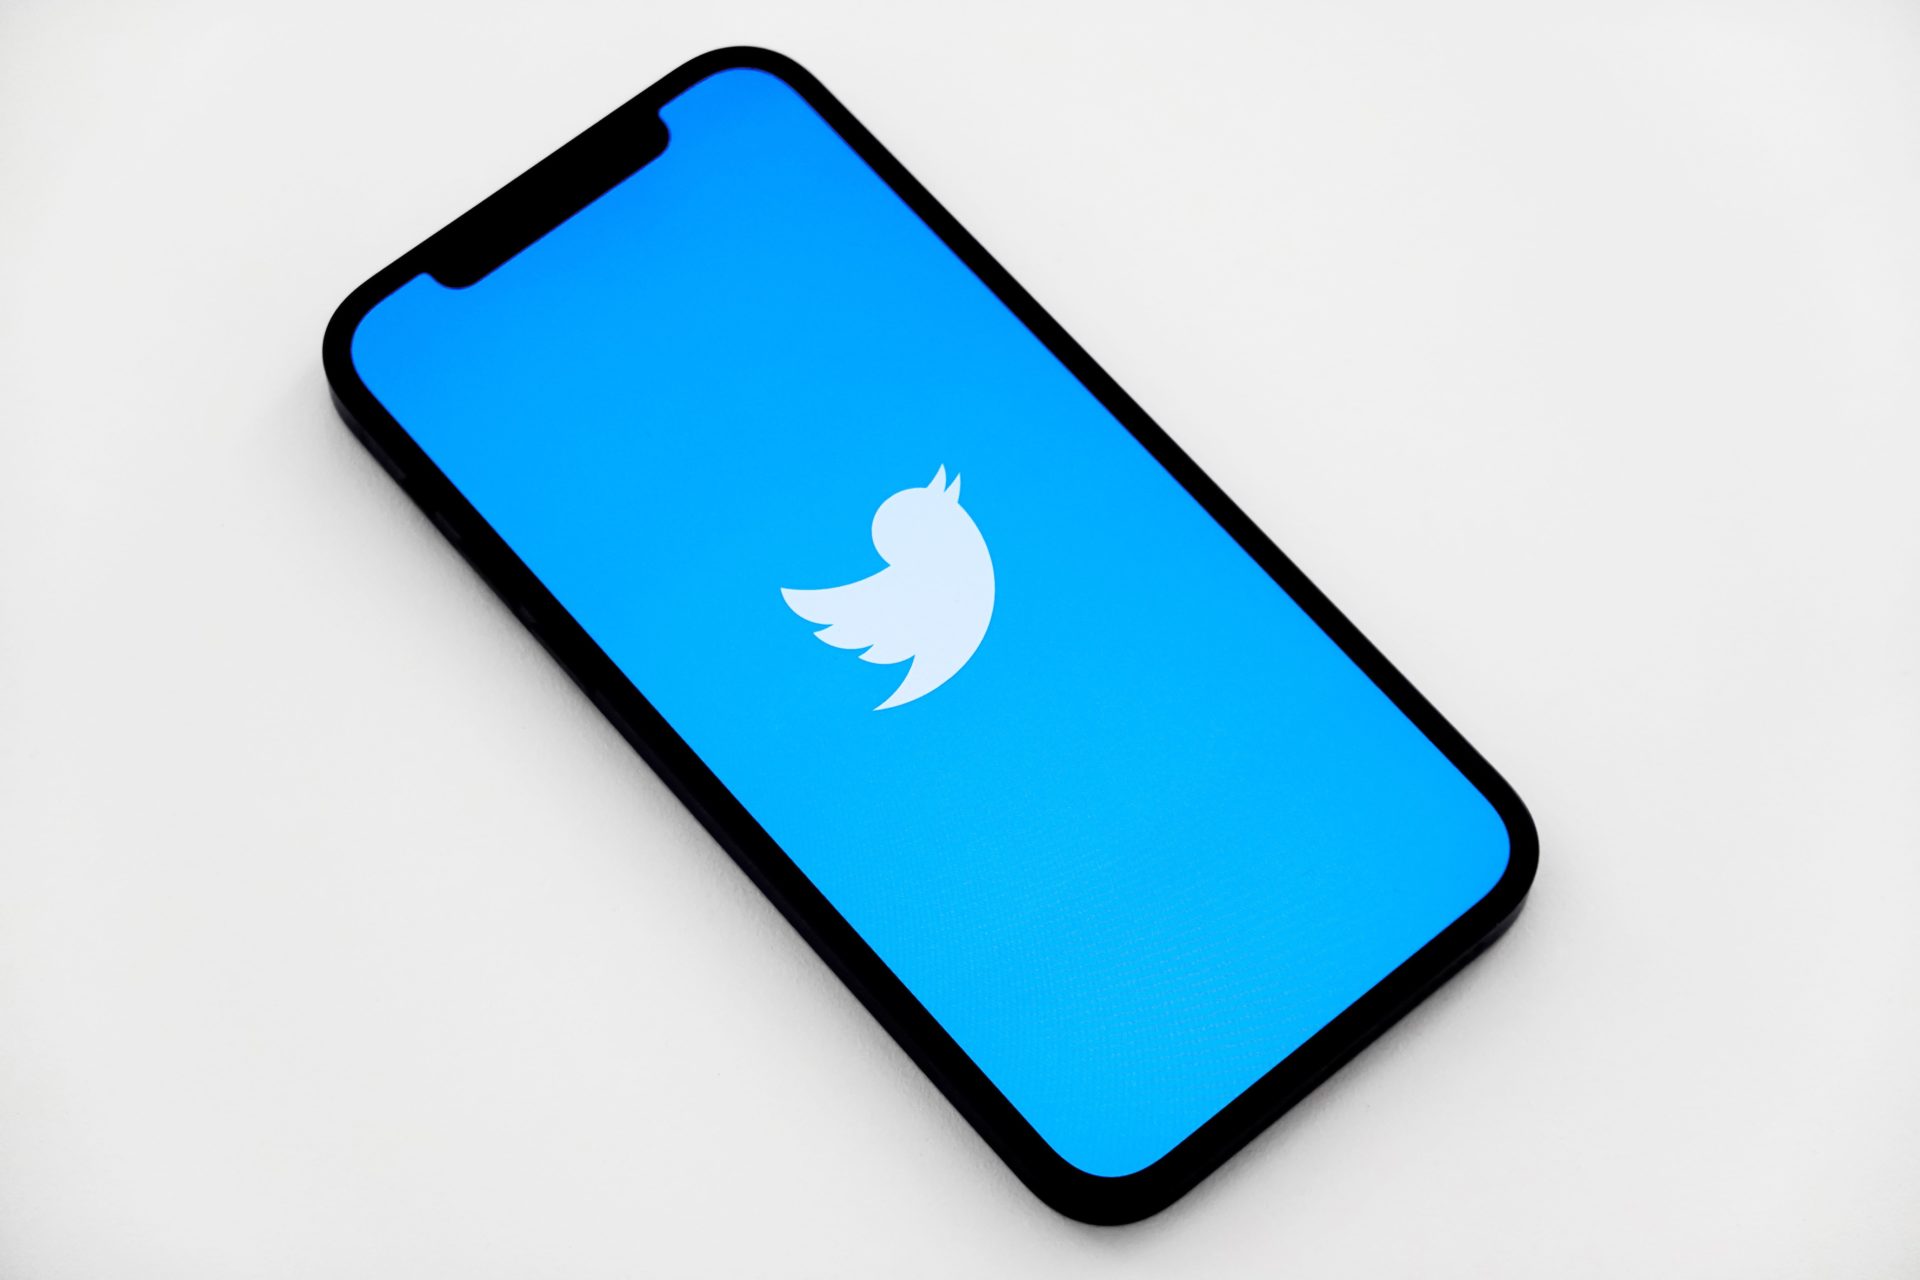 white twitter bird icon on blue background displayed on an iPhone